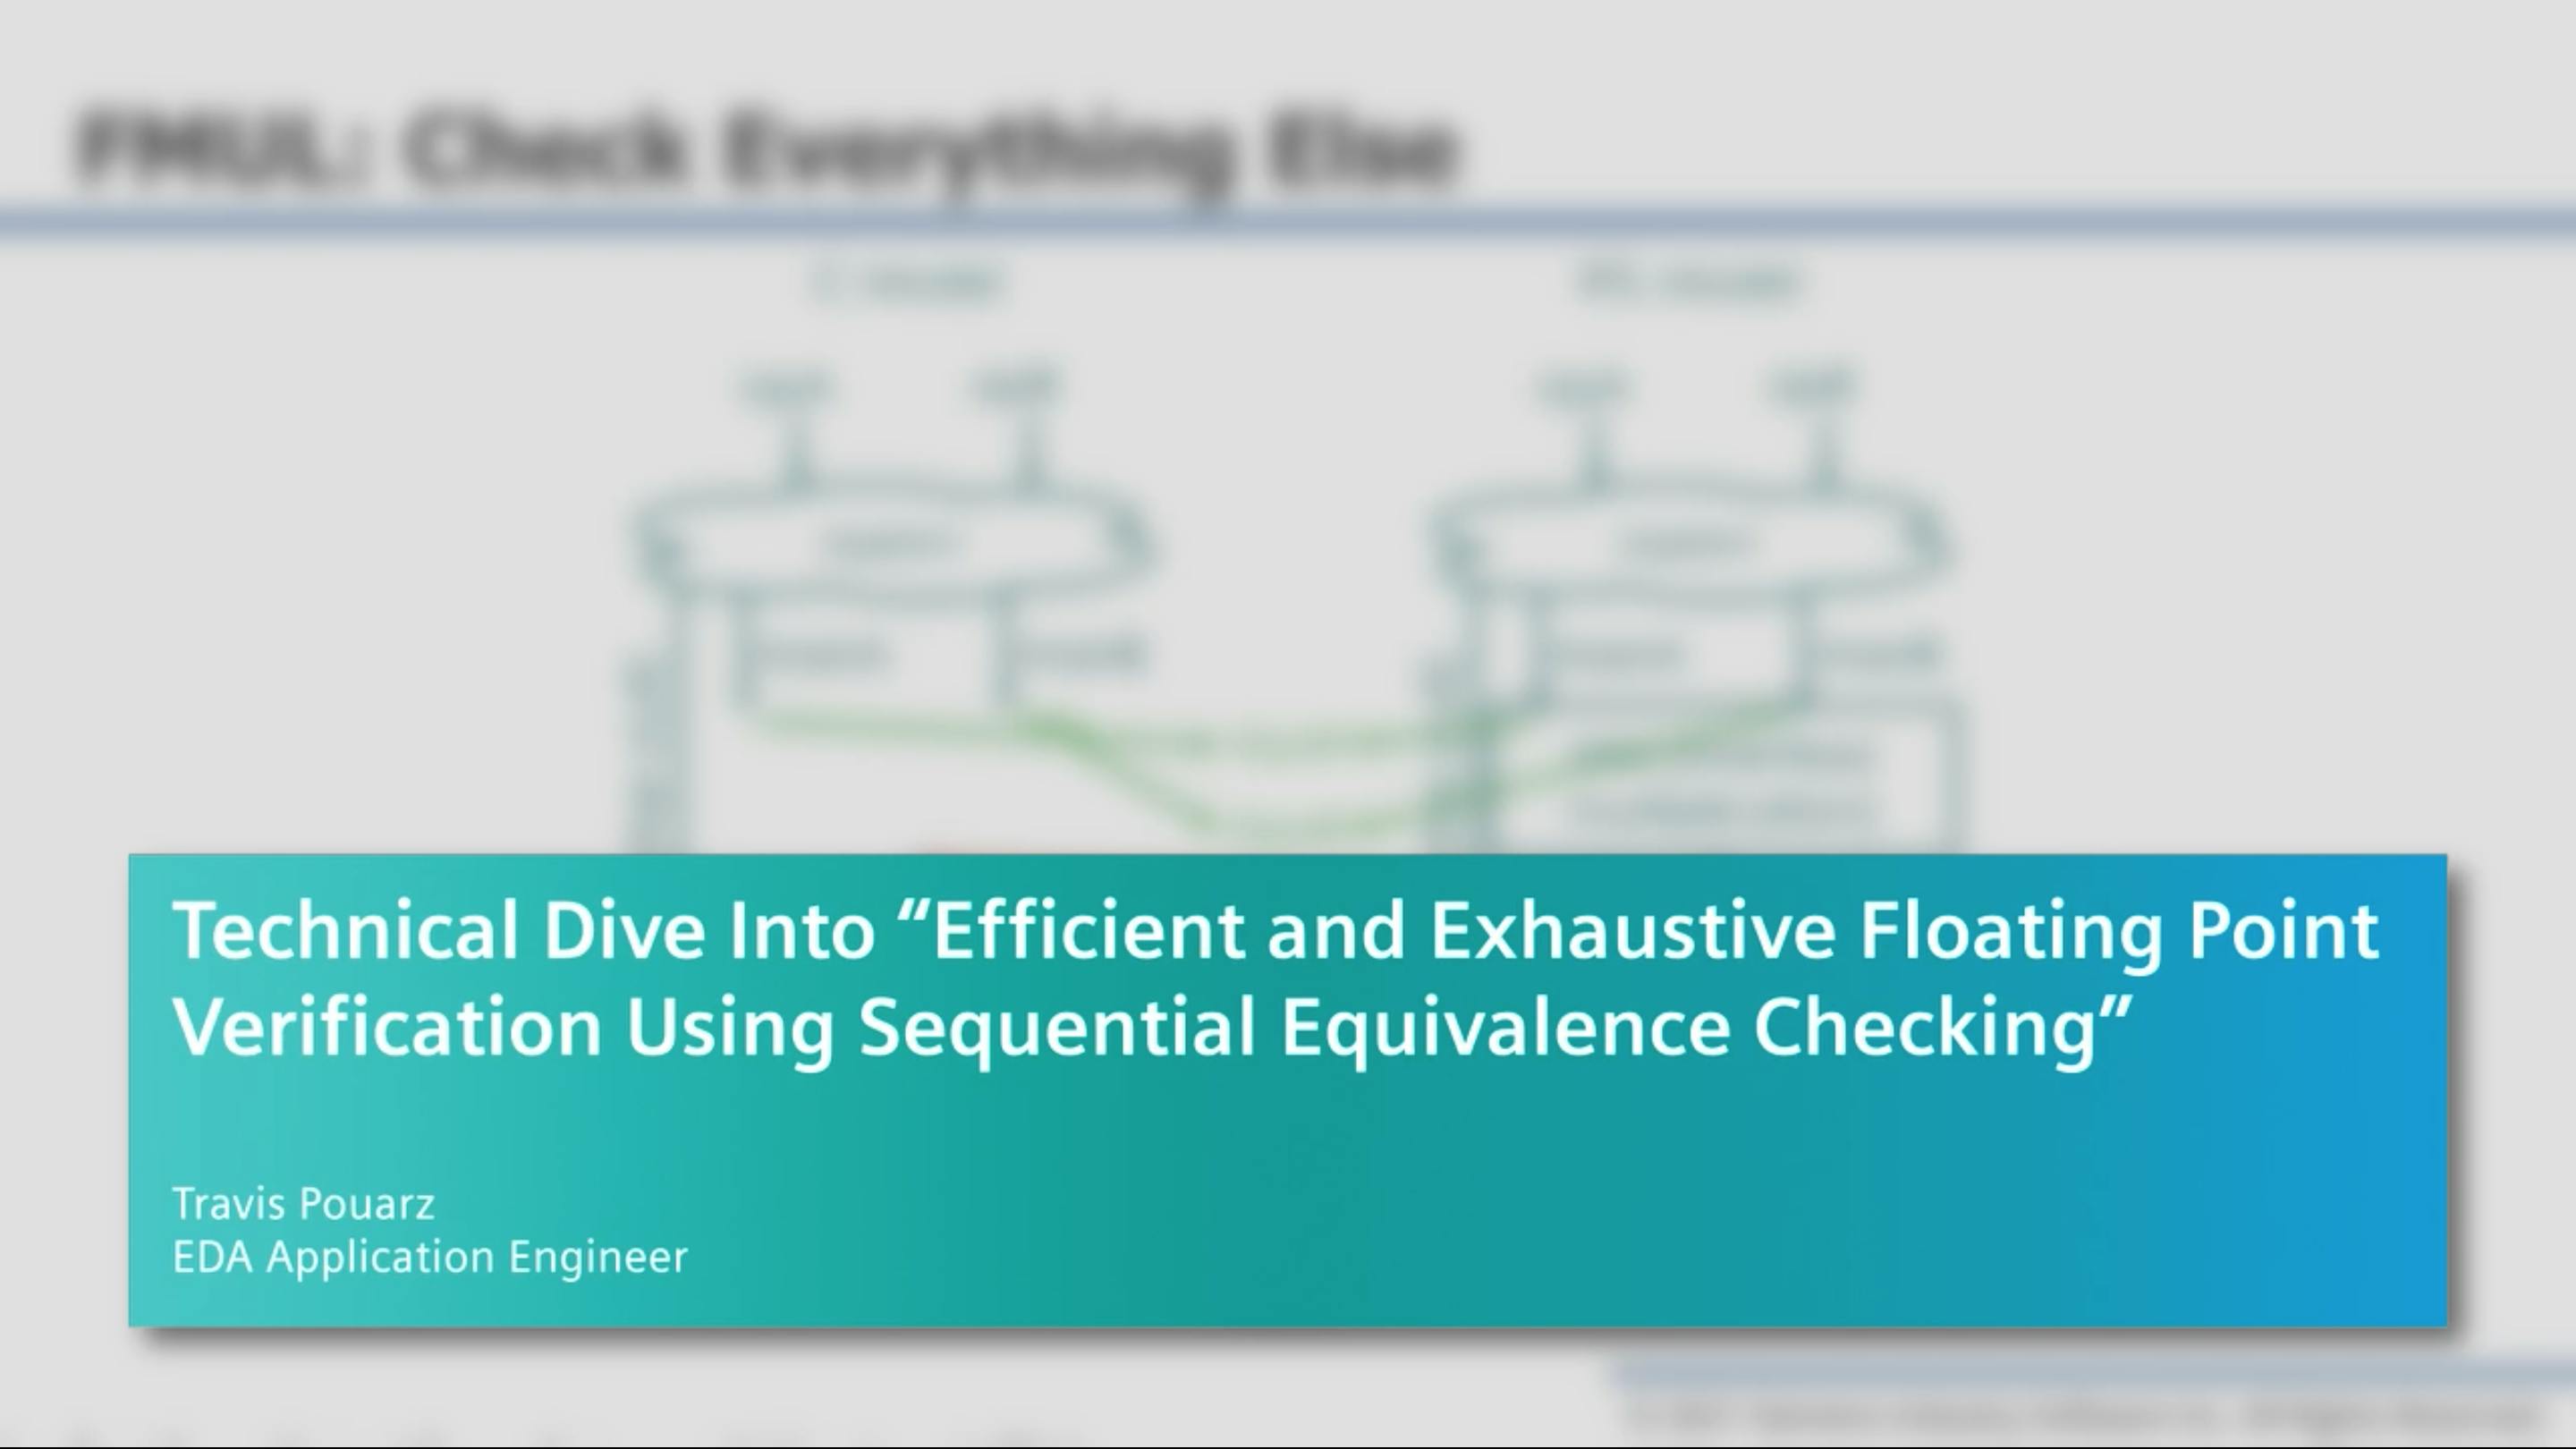 Technical Dive Into "Efficient and Exhaustive Floating Point Verification Using Sequential Equivalence Checking"